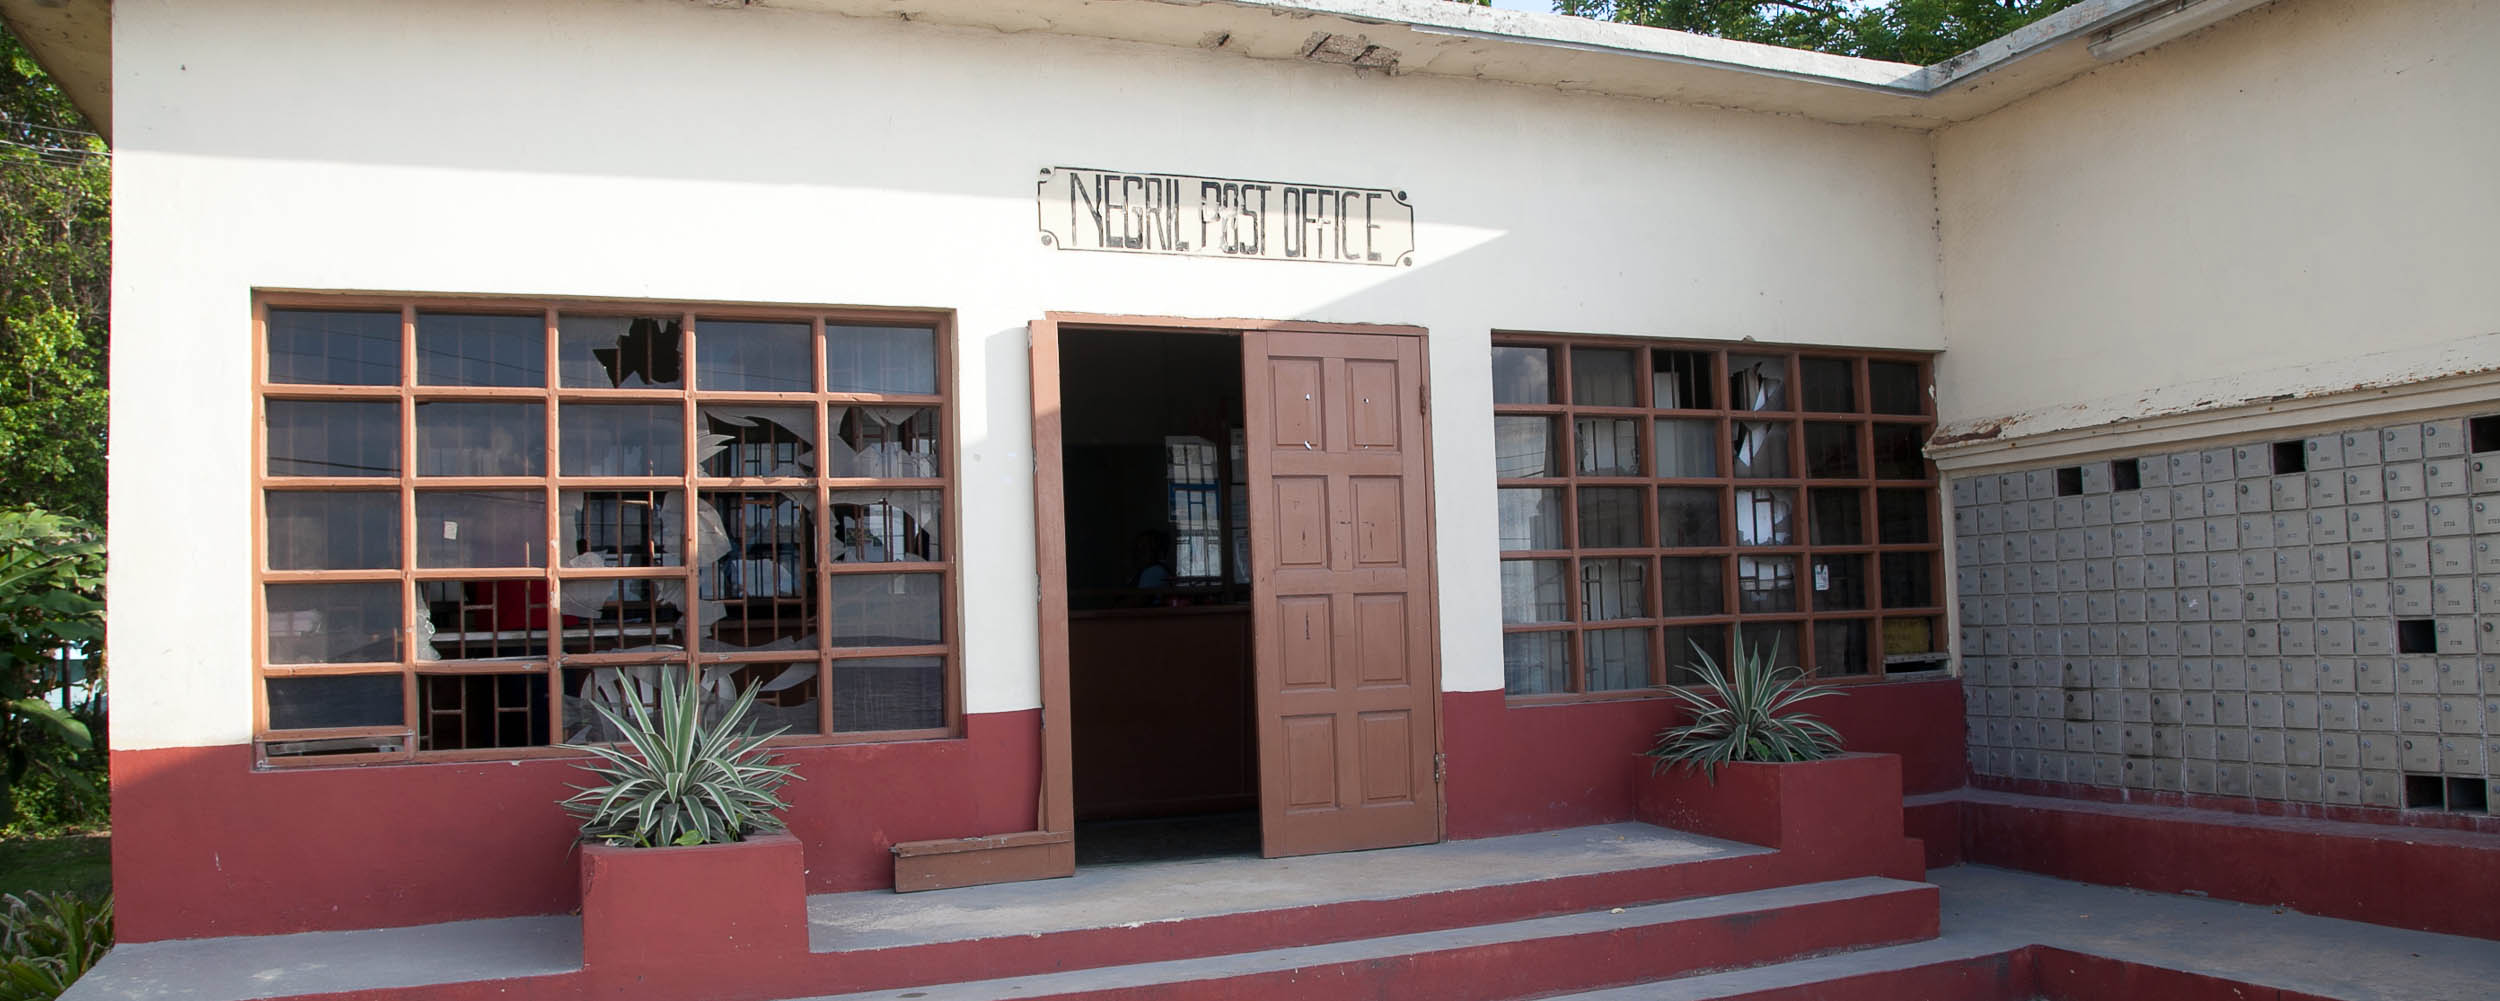 Negril Post Office, Negril Jamaica